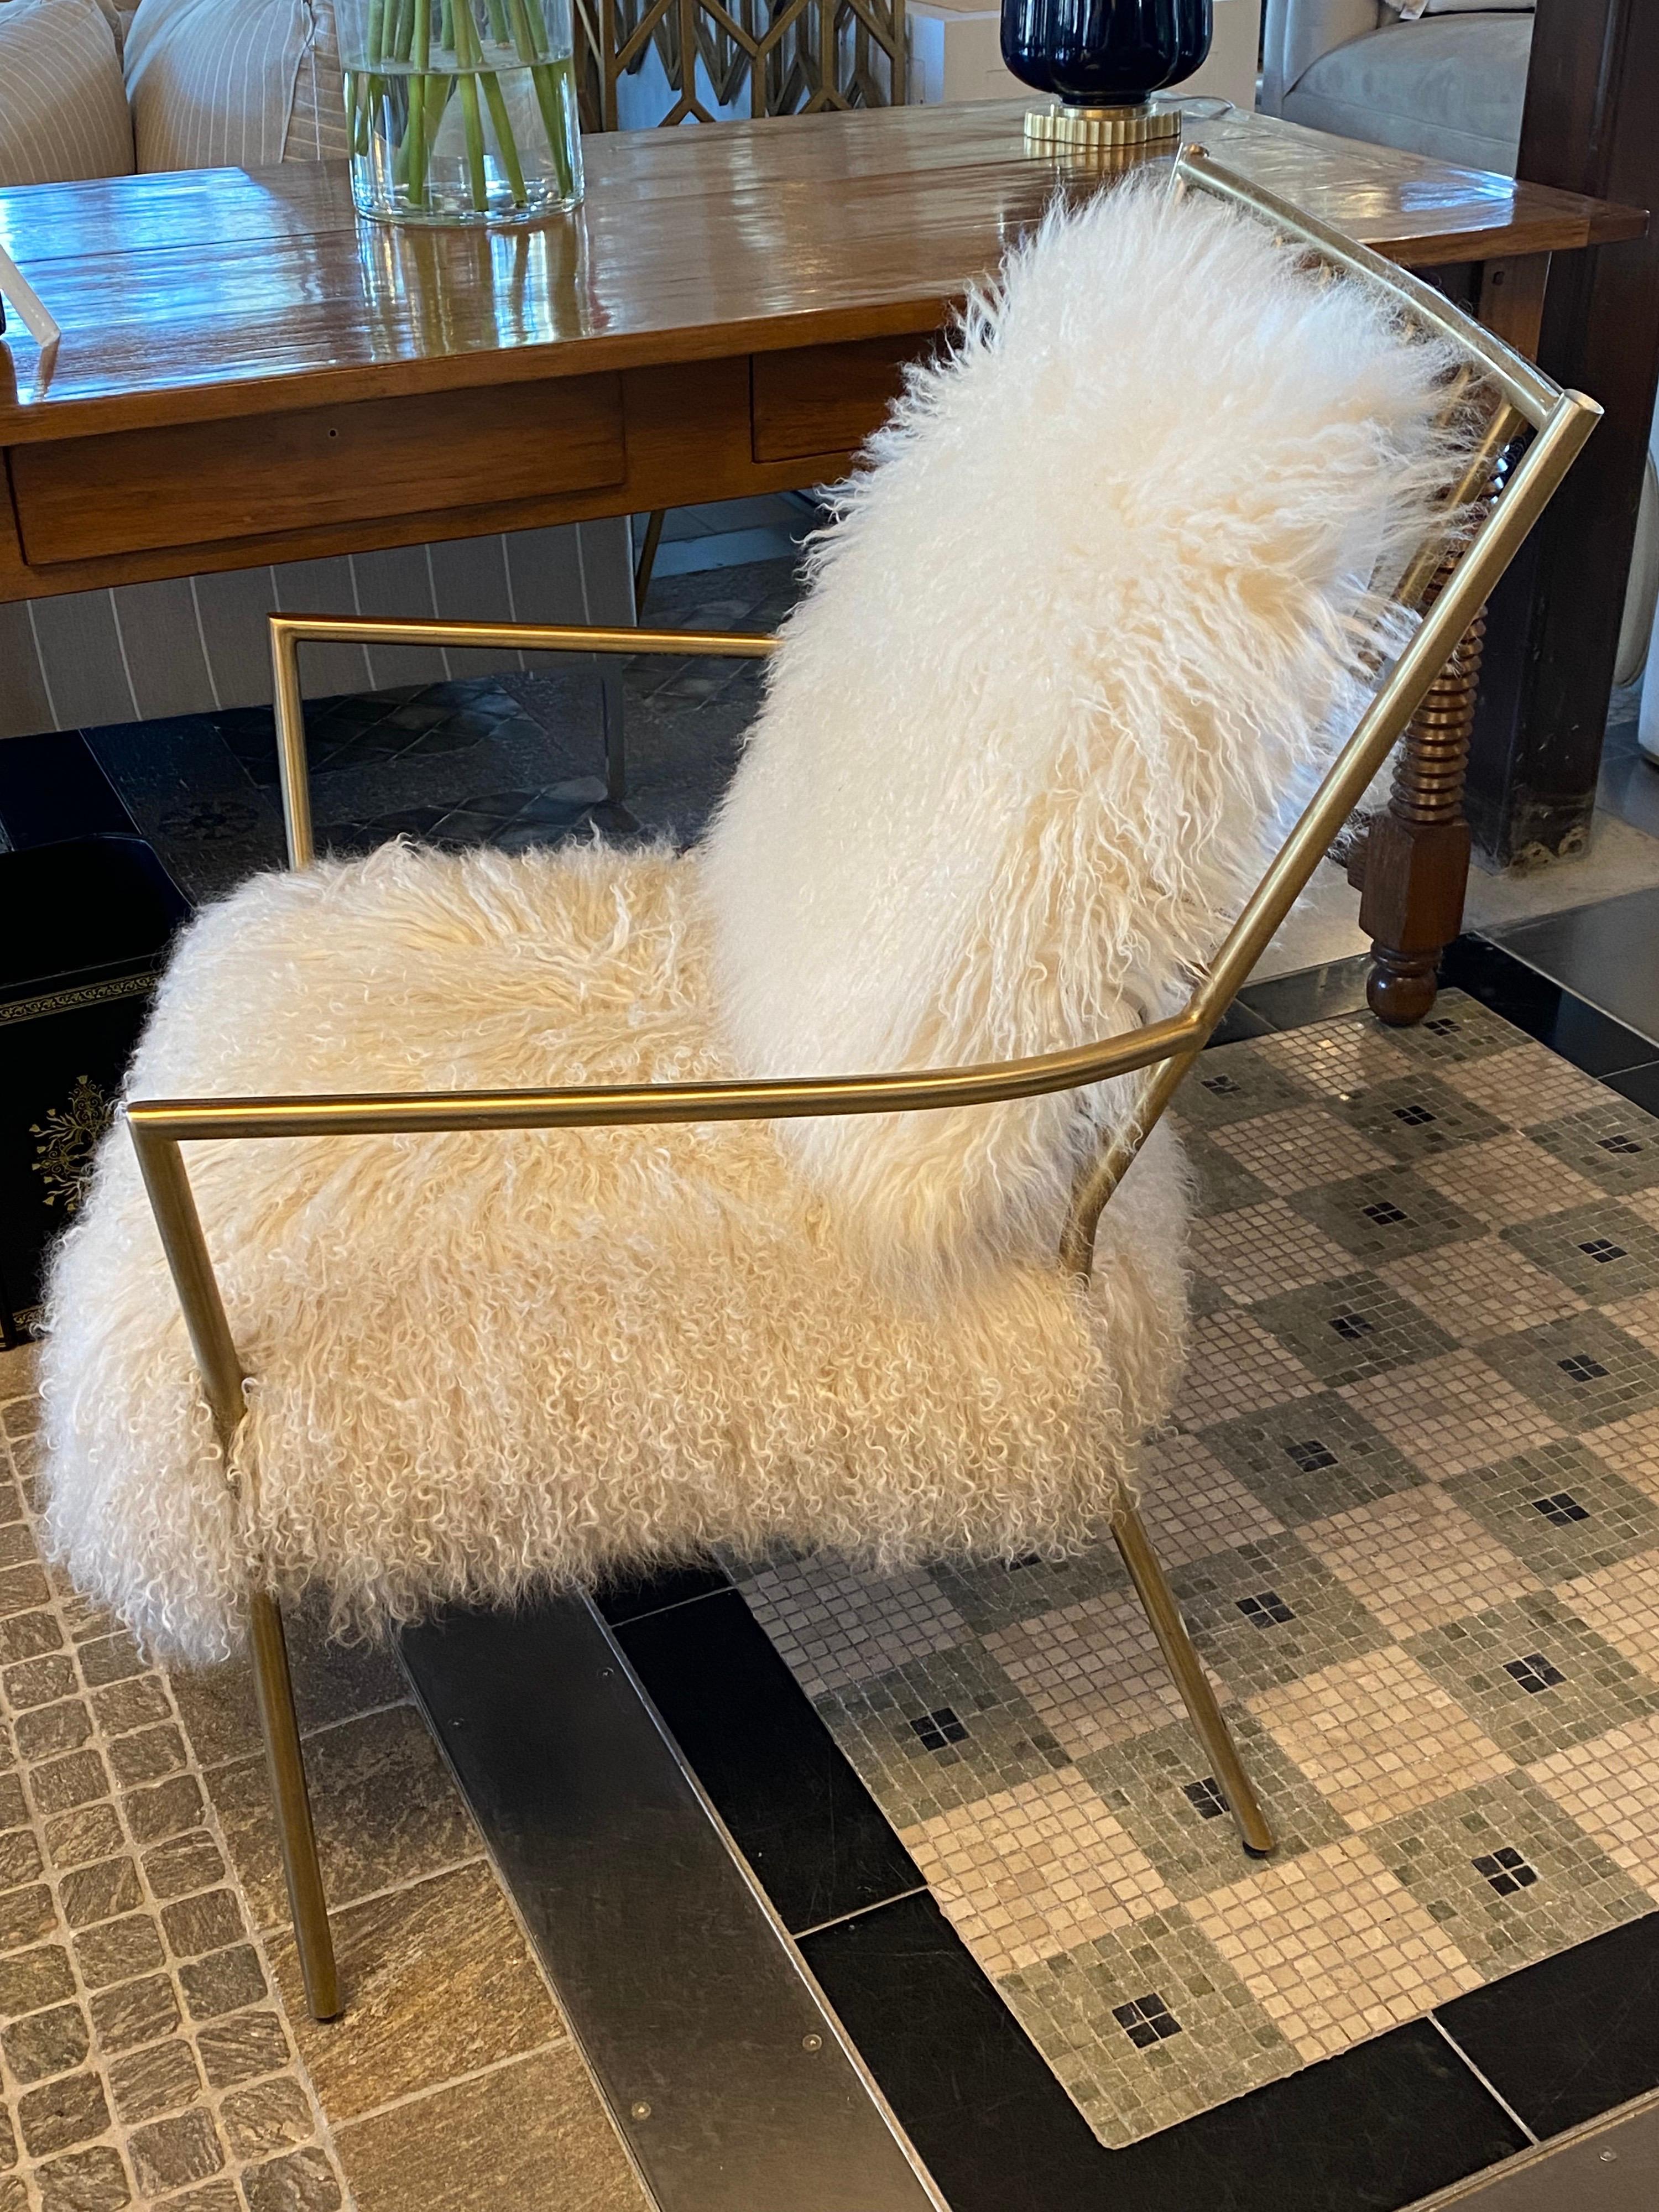 Mitchell Gold Mongolian sheepskin chair with gold frame

Measures: 27